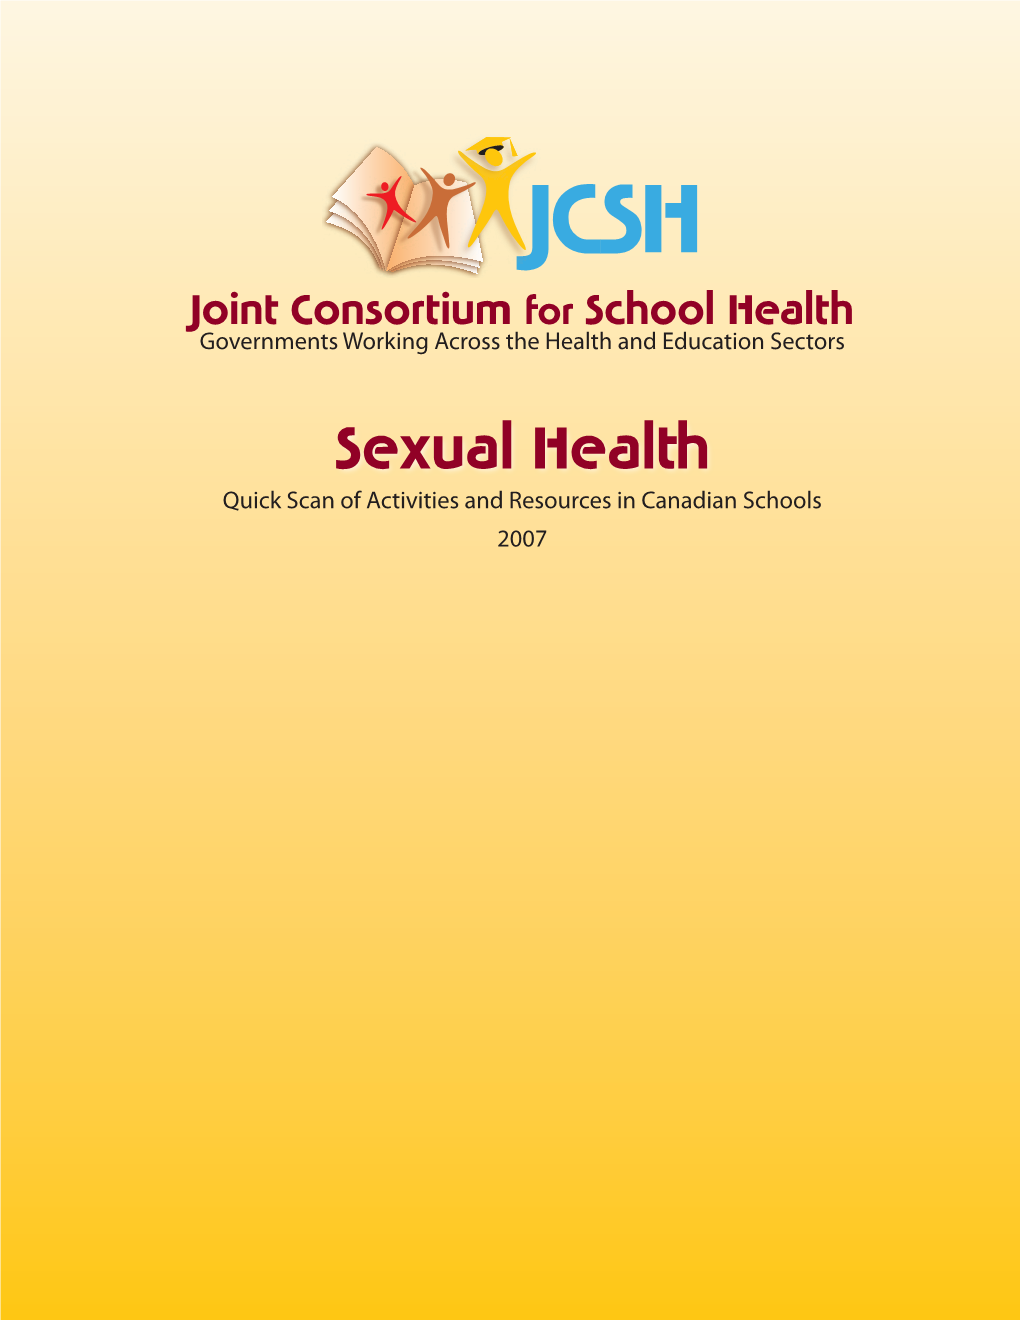 Sexual Health Quick Scan of Activities and Resources in Canadian Schools 2007